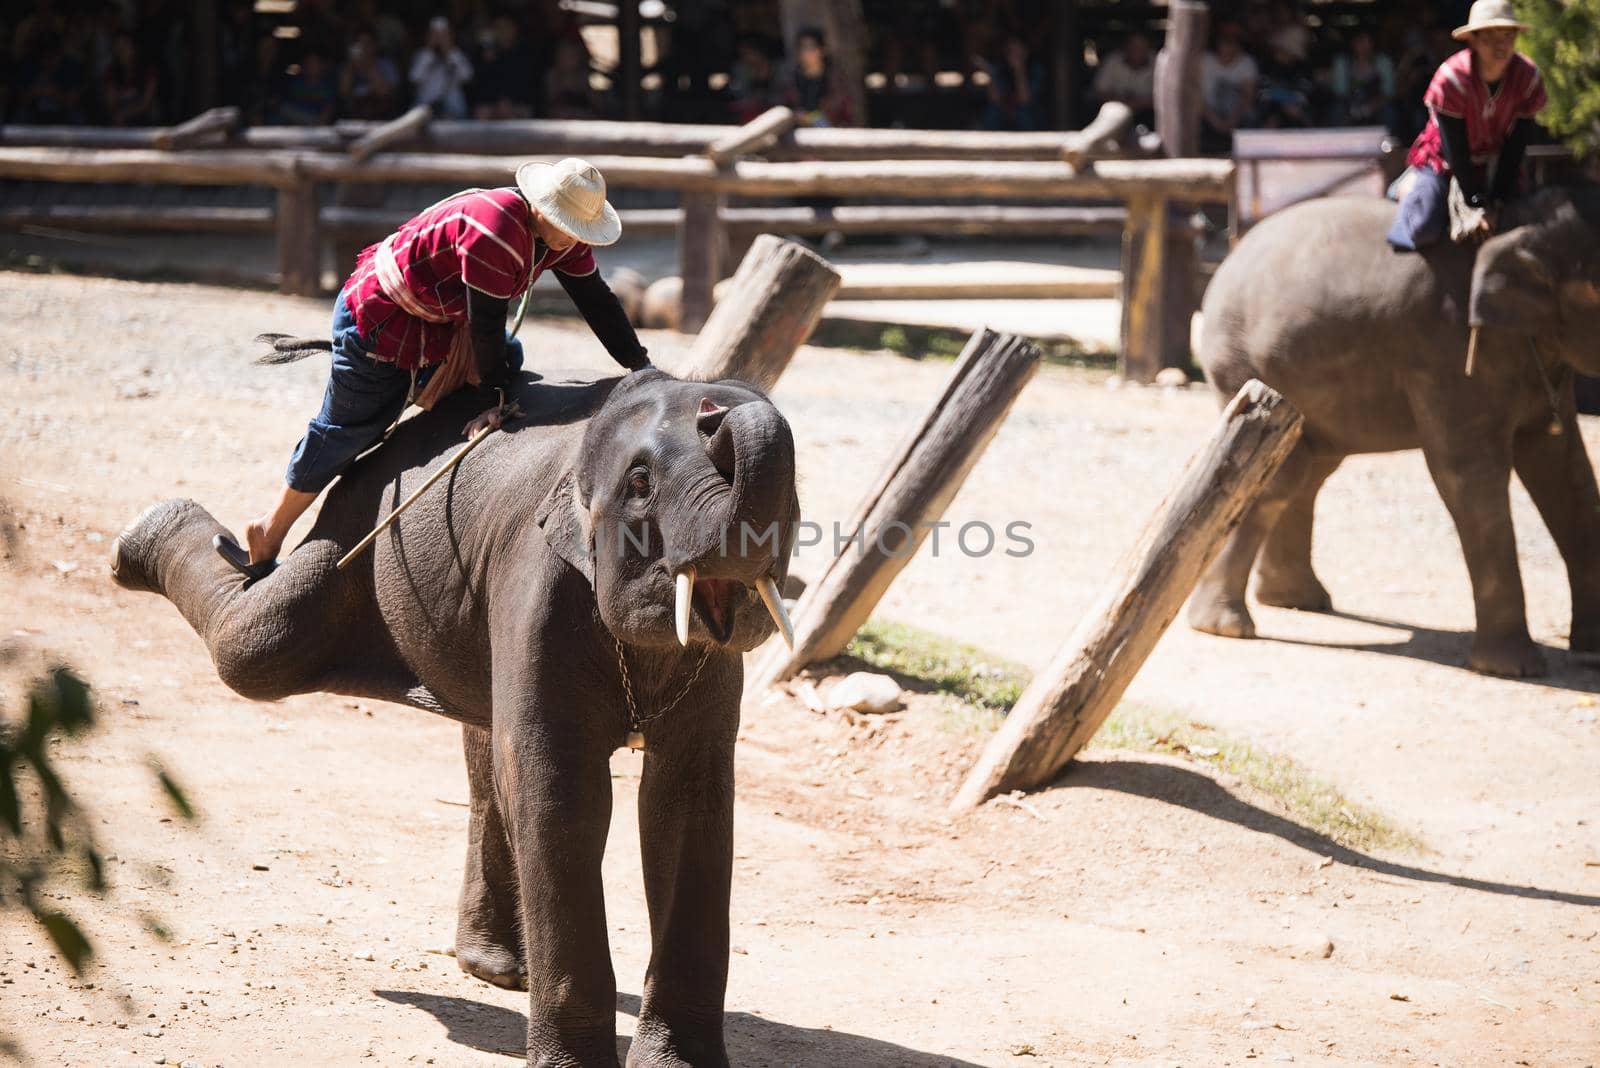 CHIANG MAI, THAILAND - JAN. 31: Daily elephant show at The Thai Elephant Conservation Center, mahout show how to ride and transport in forest, January 31, 2016 in Chiang Mai, Thailand. by Wmpix